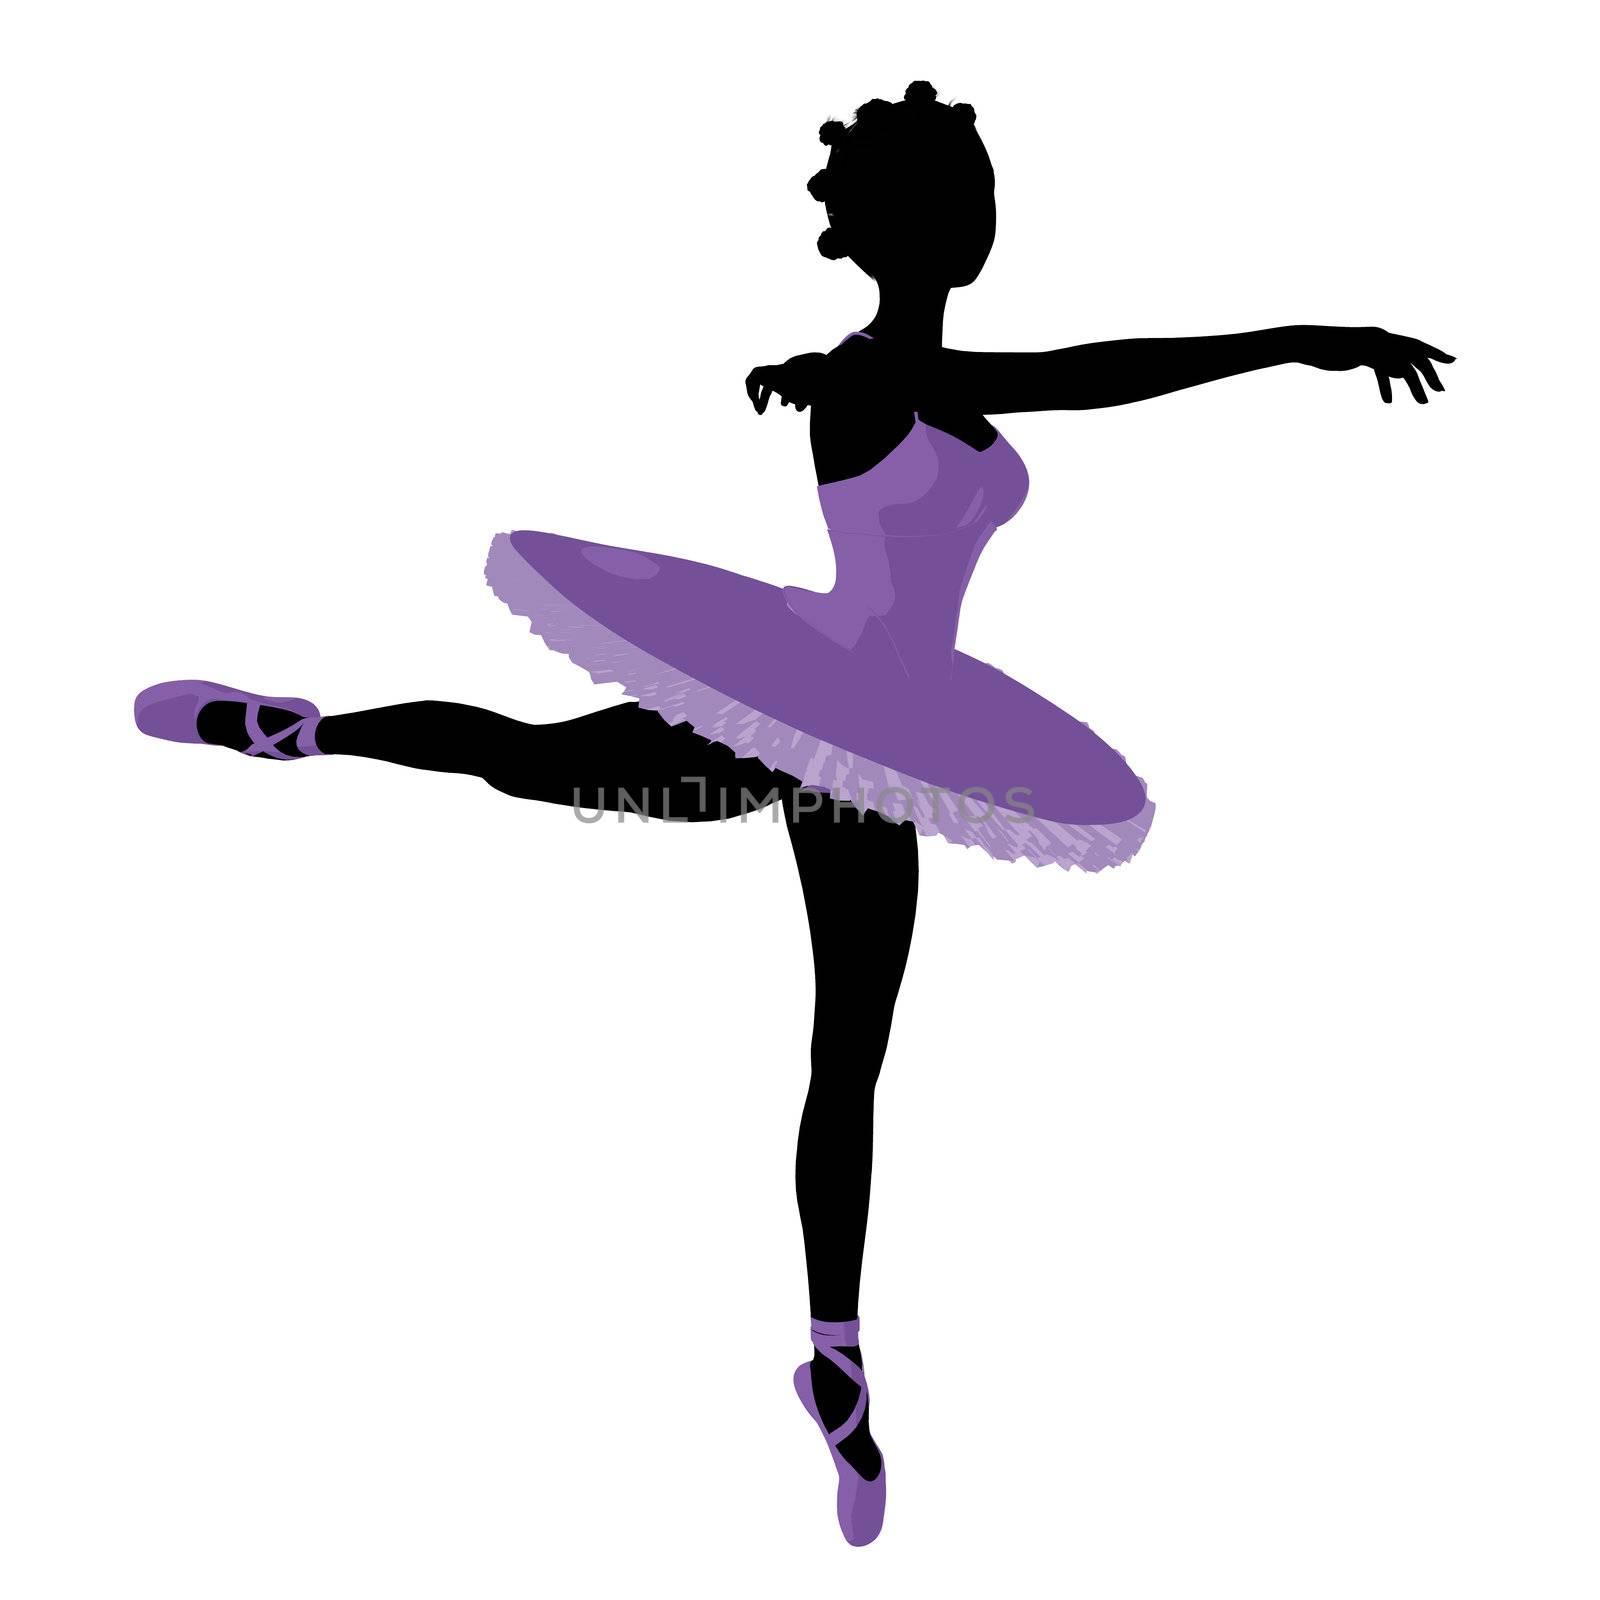 African American Ballerina Illustration Silhouette by kathygold